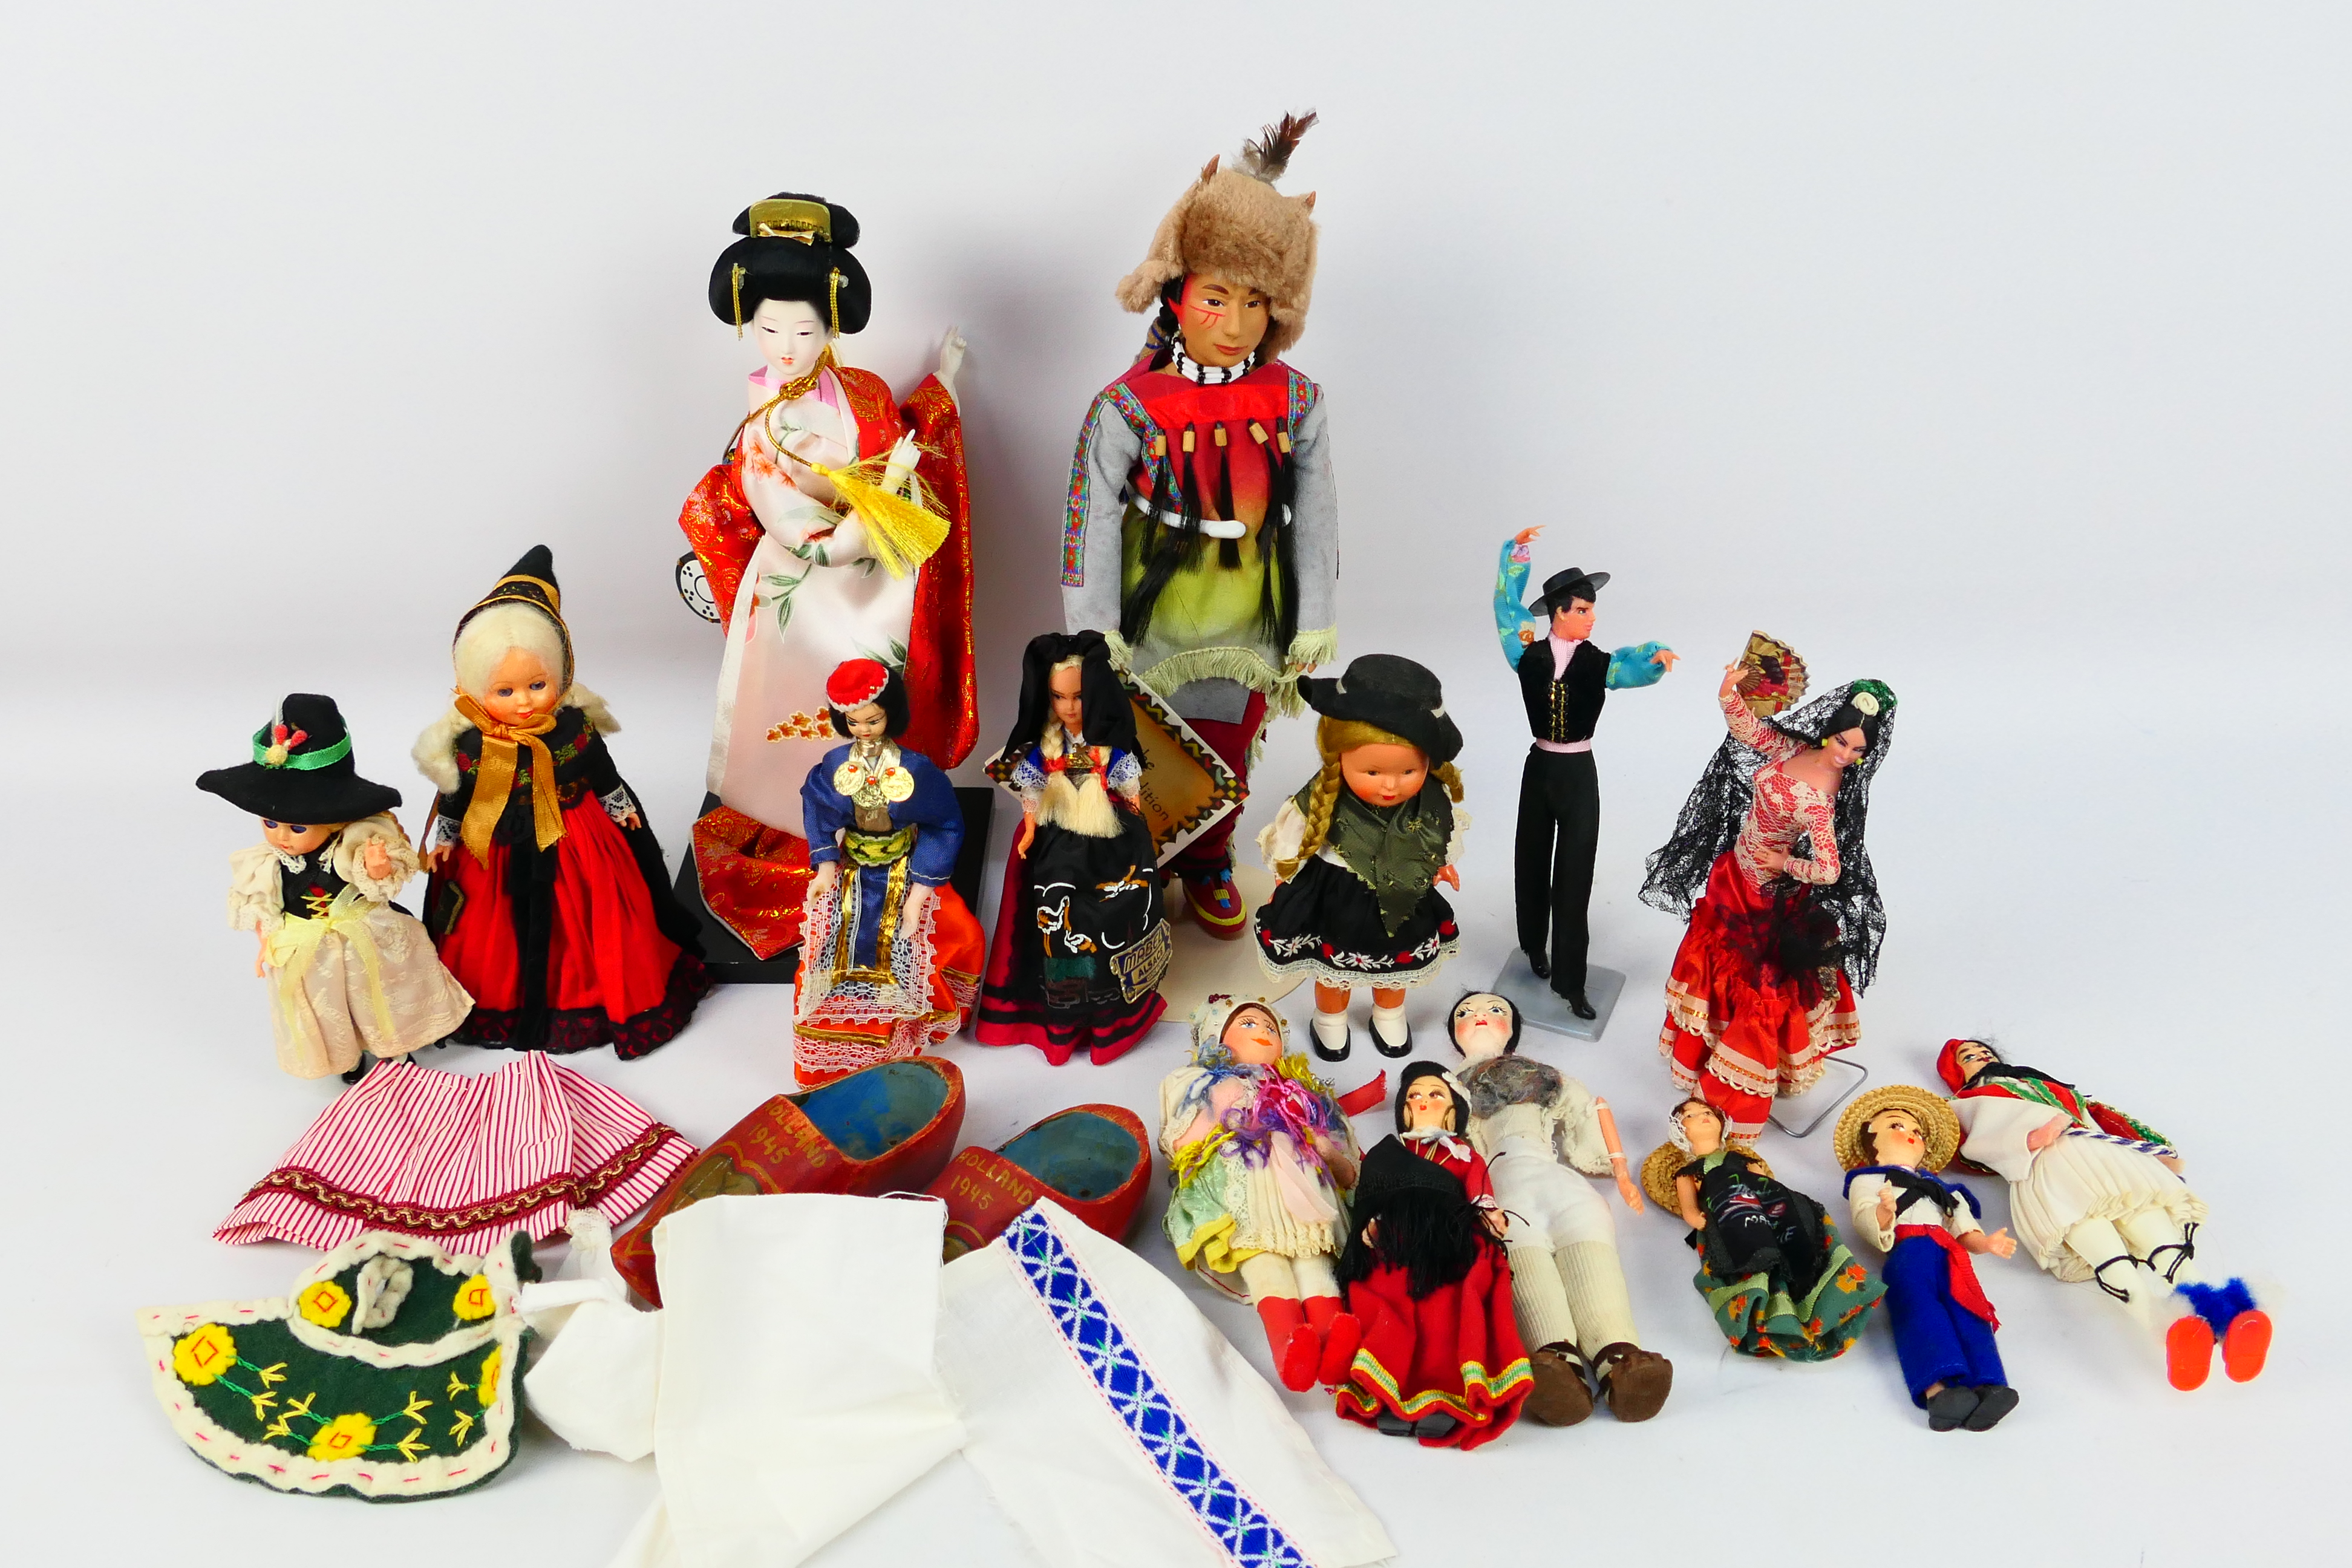 Sandy Dolls - Other - A collection of costume dolls including a limited edition Wise Buffalo Sioux